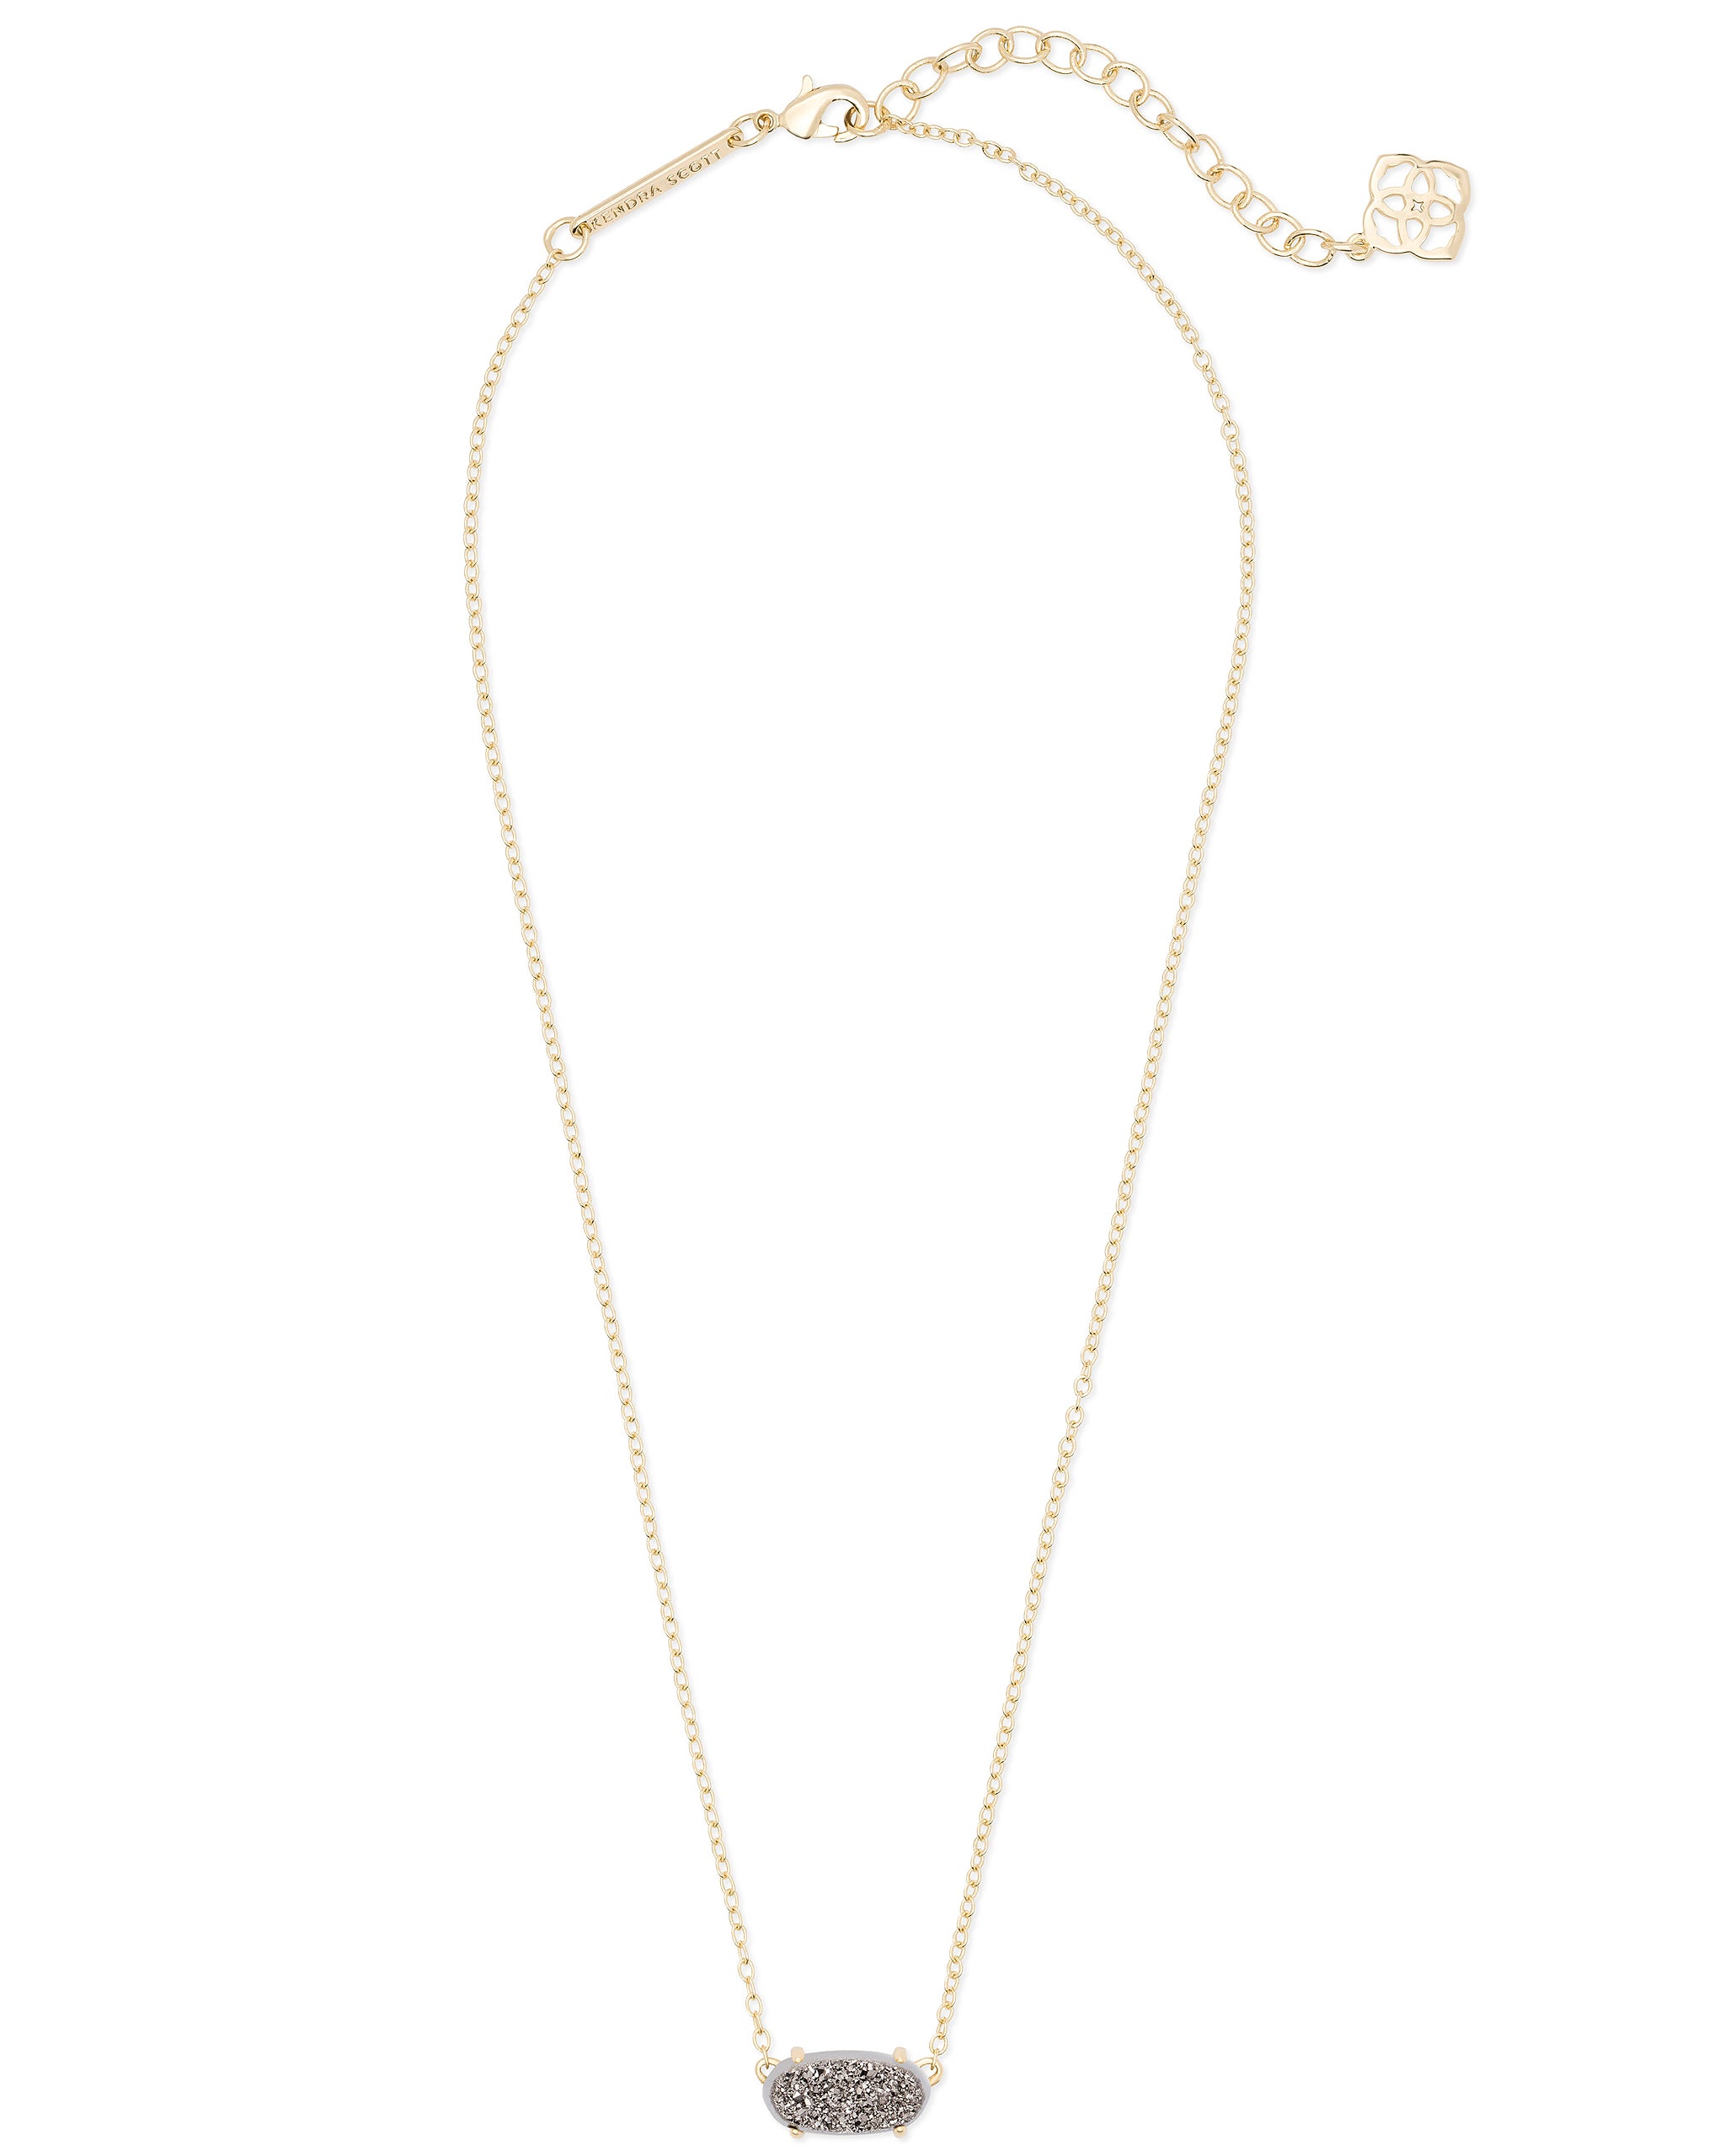 Kendra Scott Ever Oval Pendant Necklace in Platinum Drusy and Gold